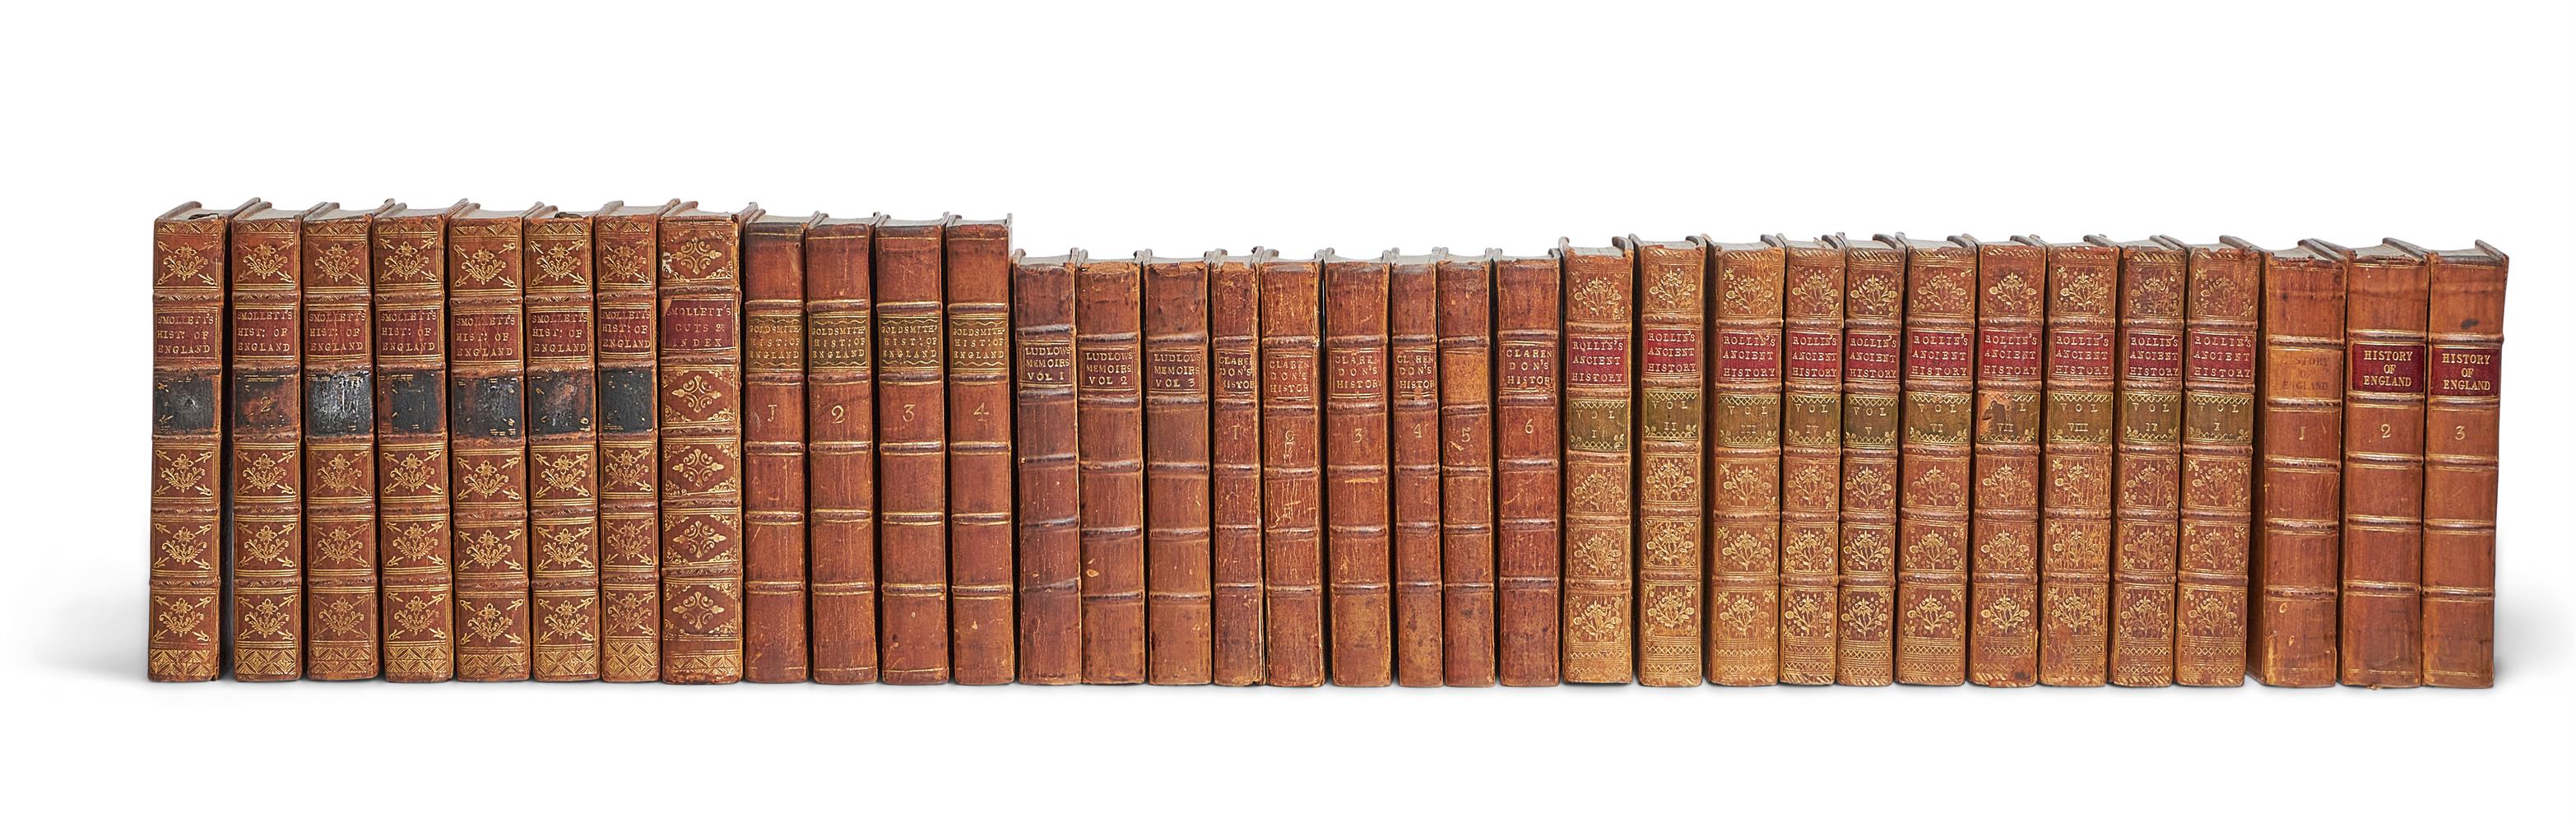 Ɵ HISTORY: A COLLECTION OF 34 EIGHTEENTH-CENTURY VOLUMES, IN ENGLISH